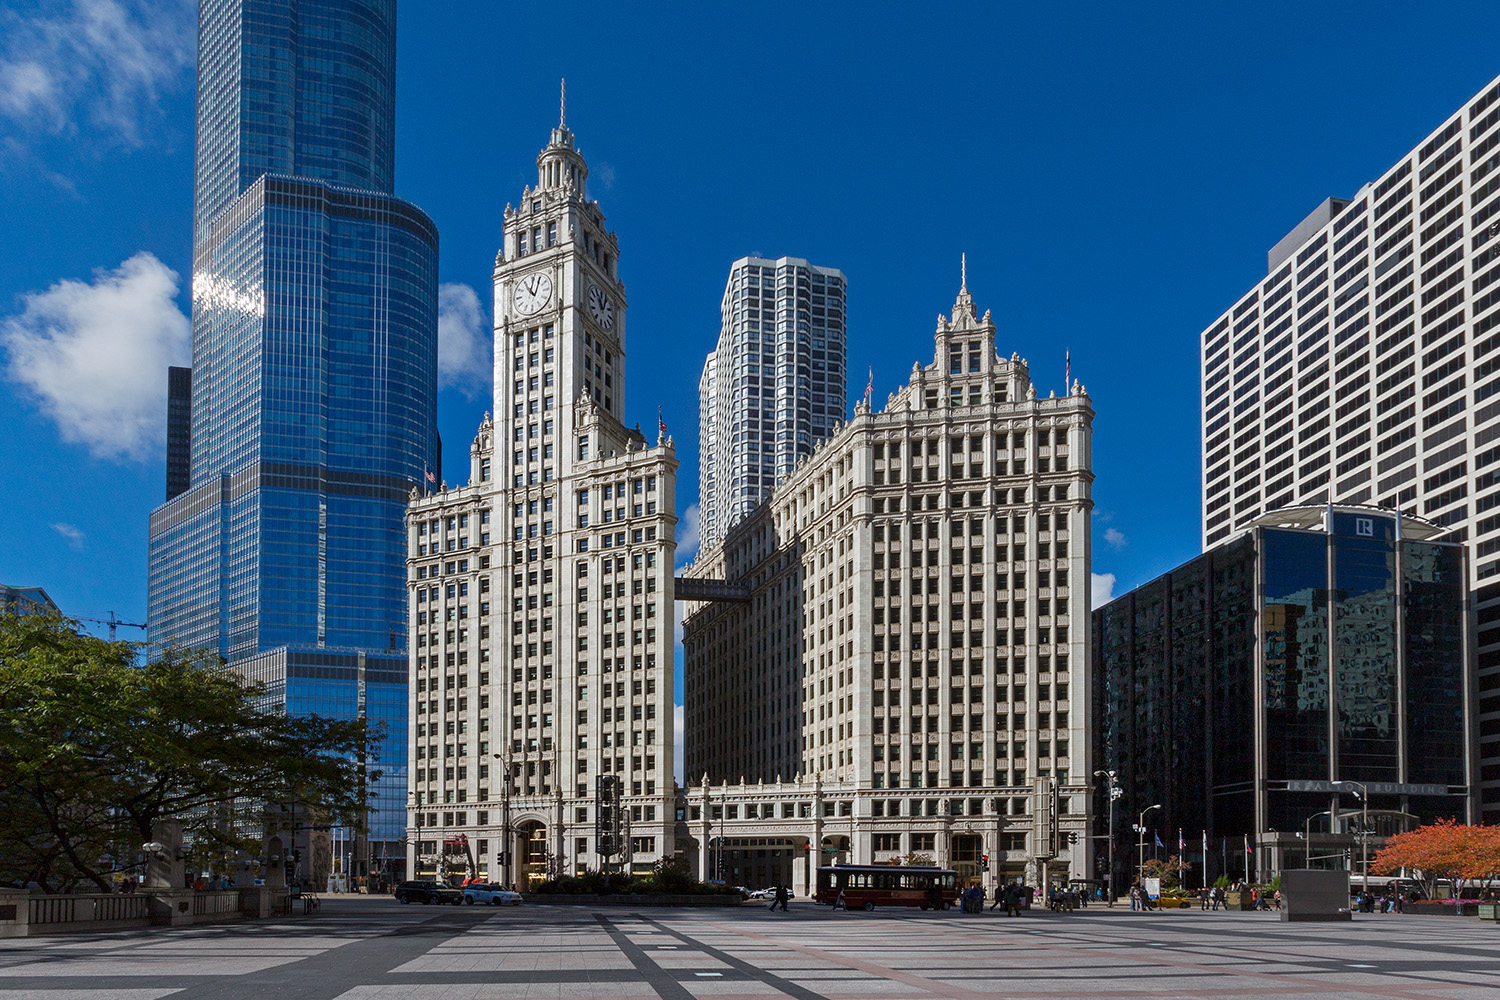 Wrigley Building / Graham,Anderson, Probst & White / Chicago IL / For The New York Times